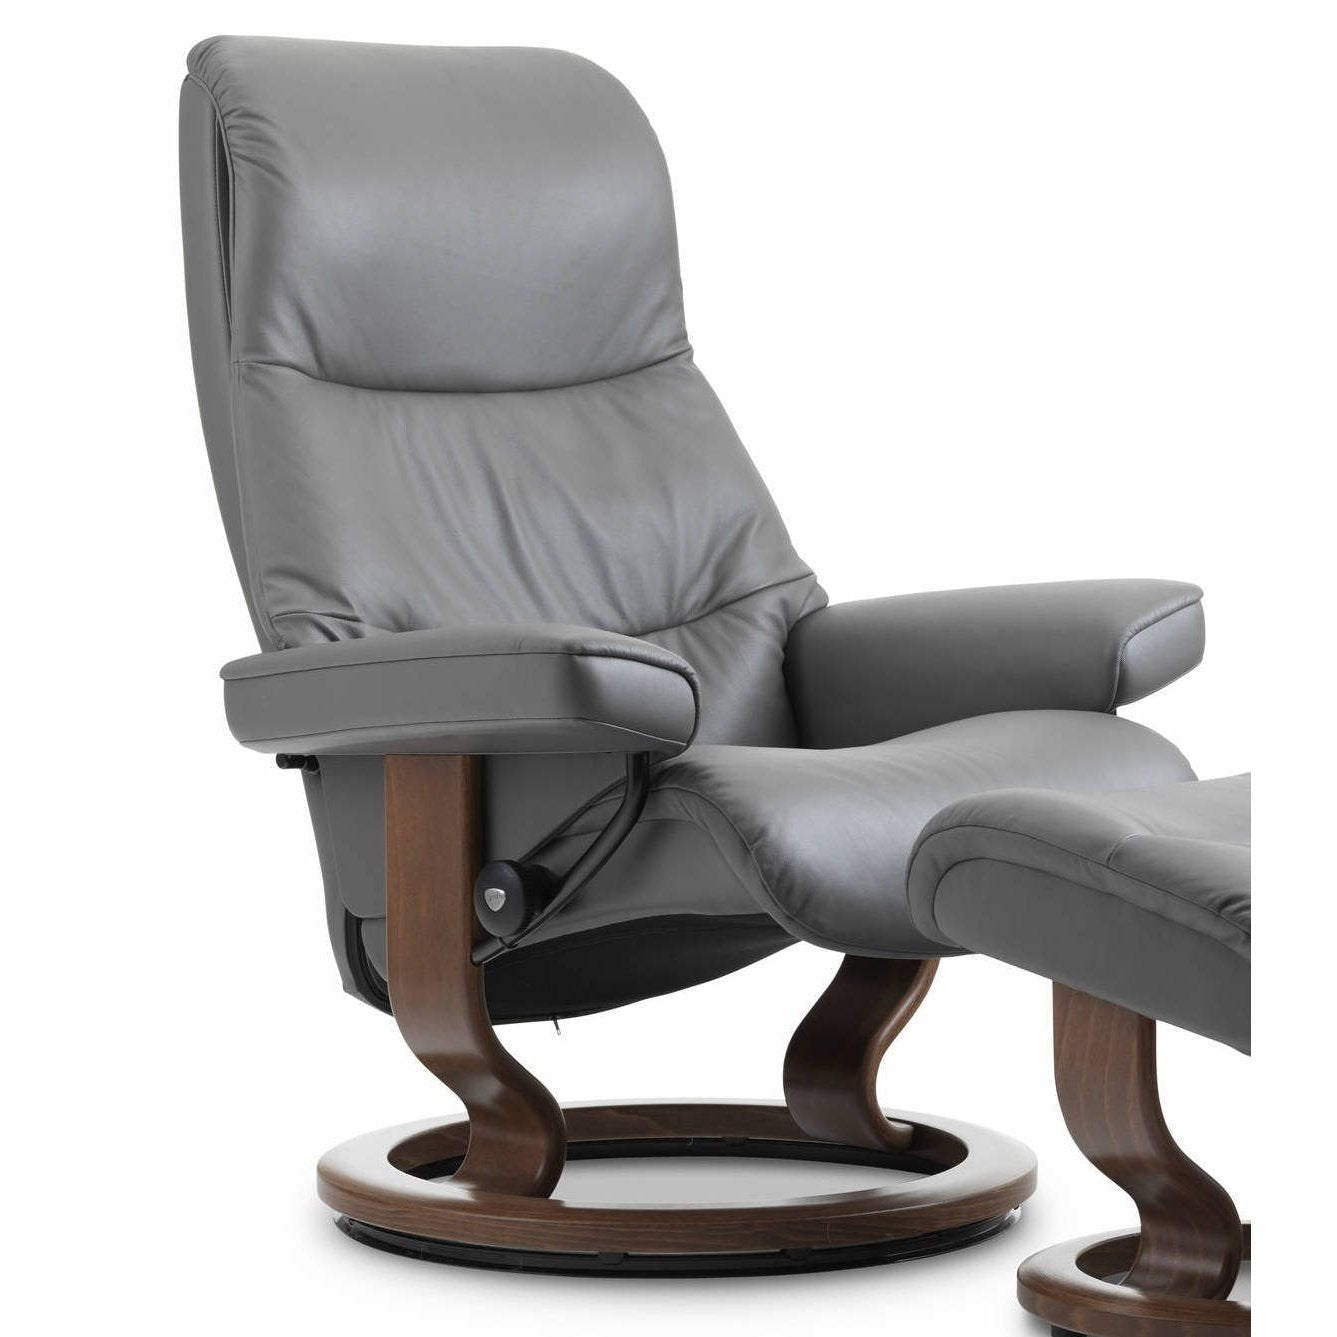 Stressless View Small Recliner Chair